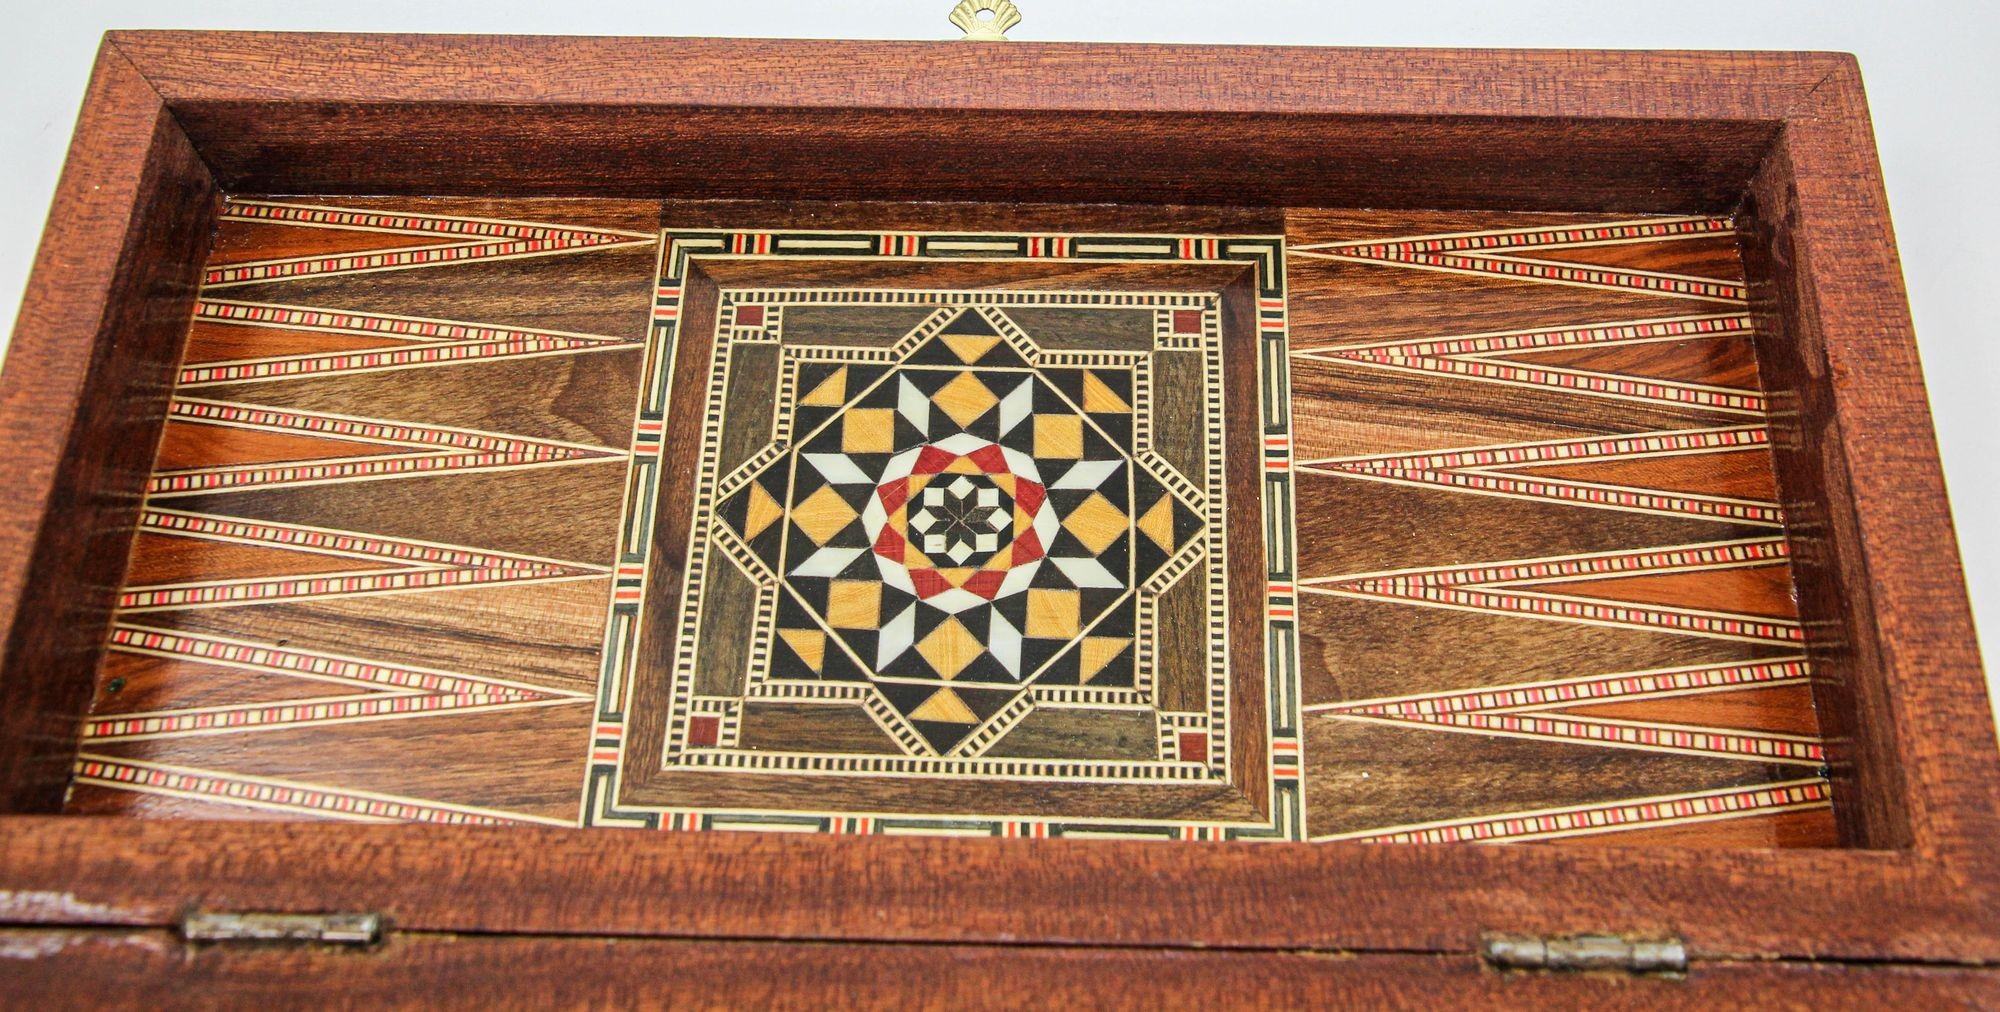 Lebanese Middle Eastern Mosaic Wooden Inlaid Marquetry Box Game Backgammon